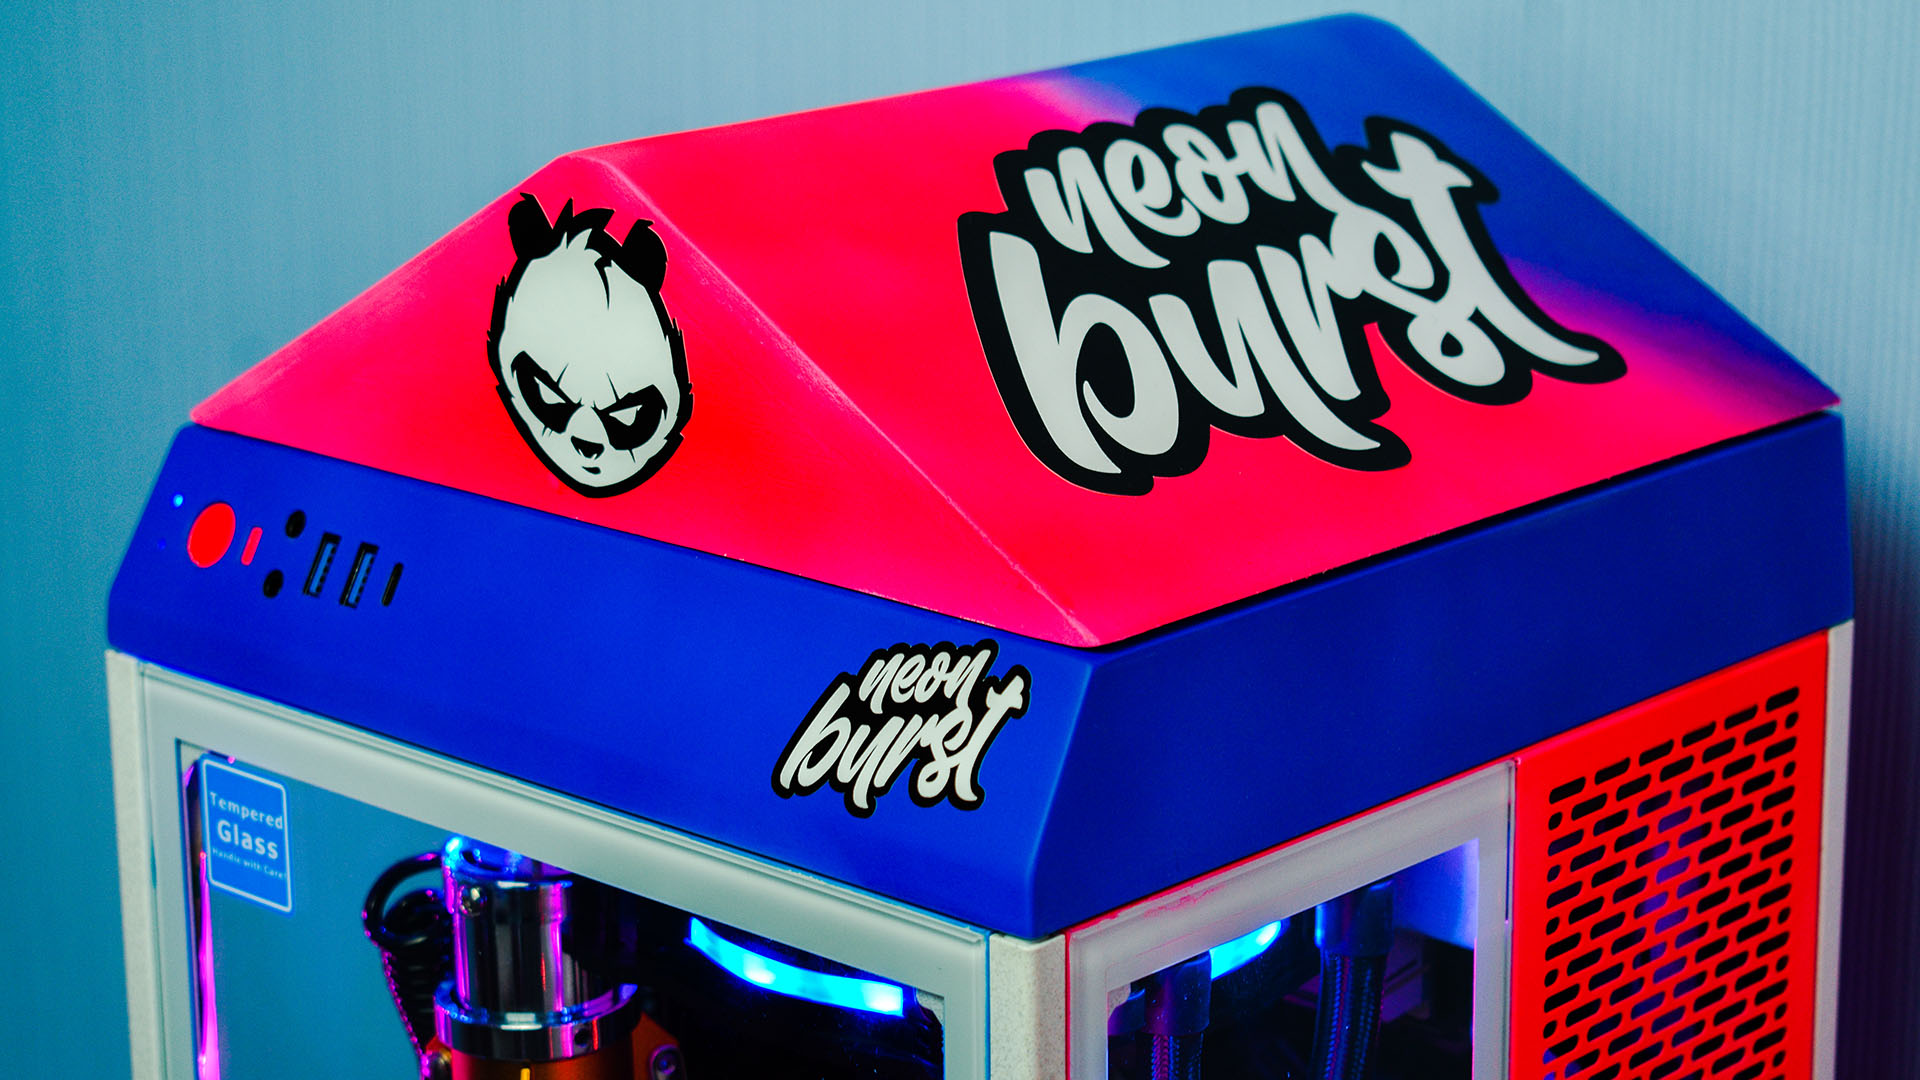 Claw machine gaming PC in bright red and blue colors